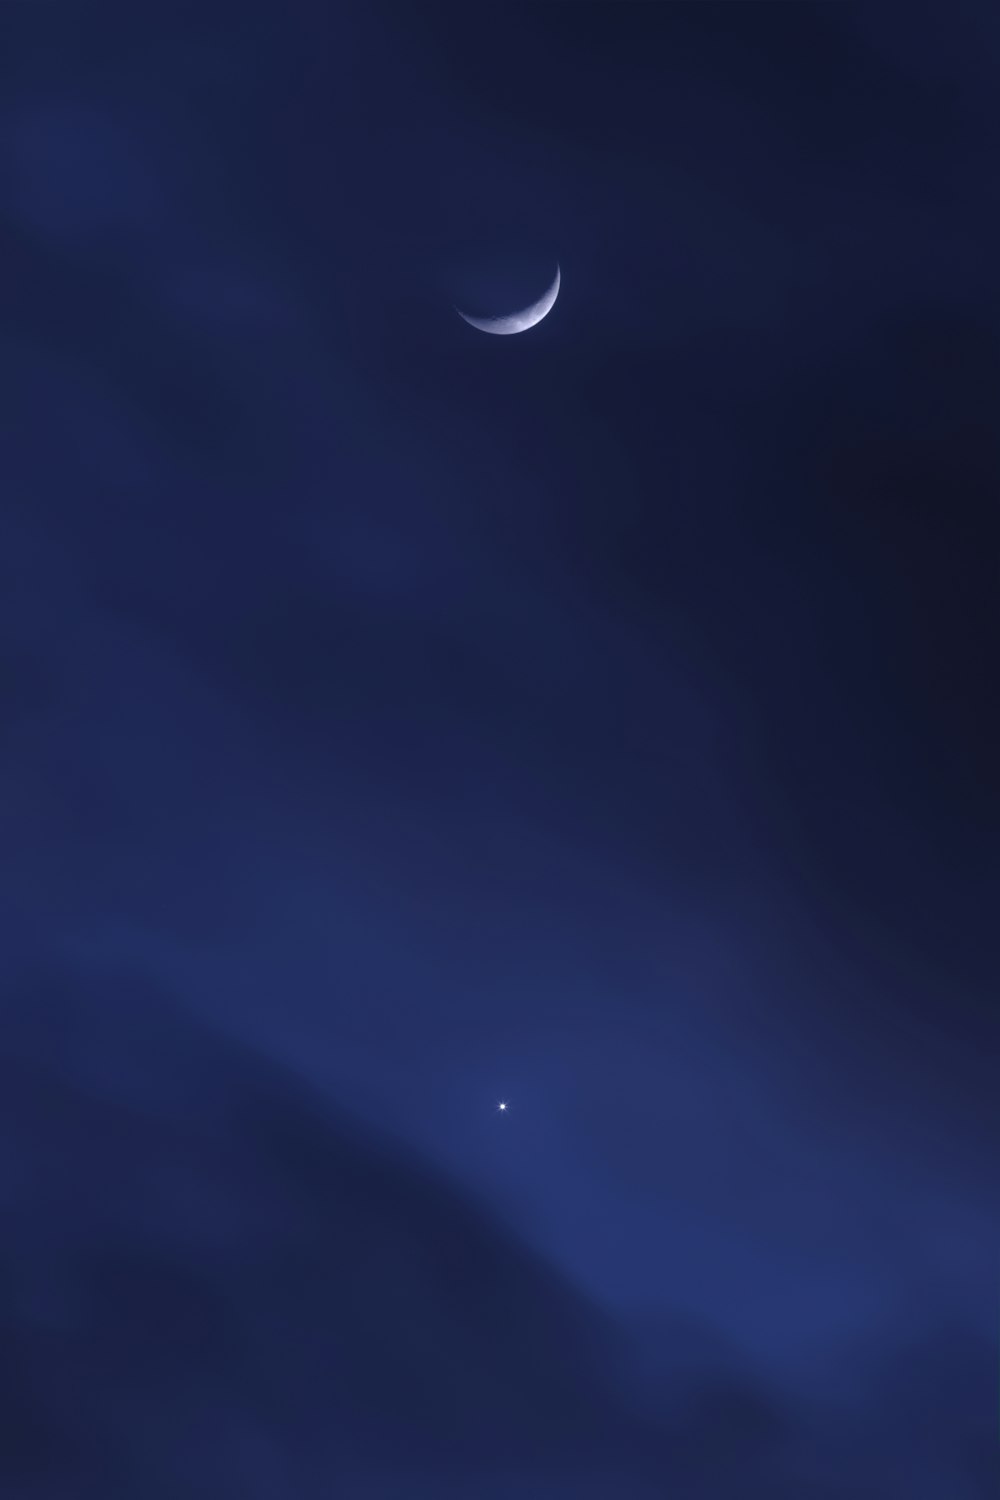 a night sky with the moon and two stars